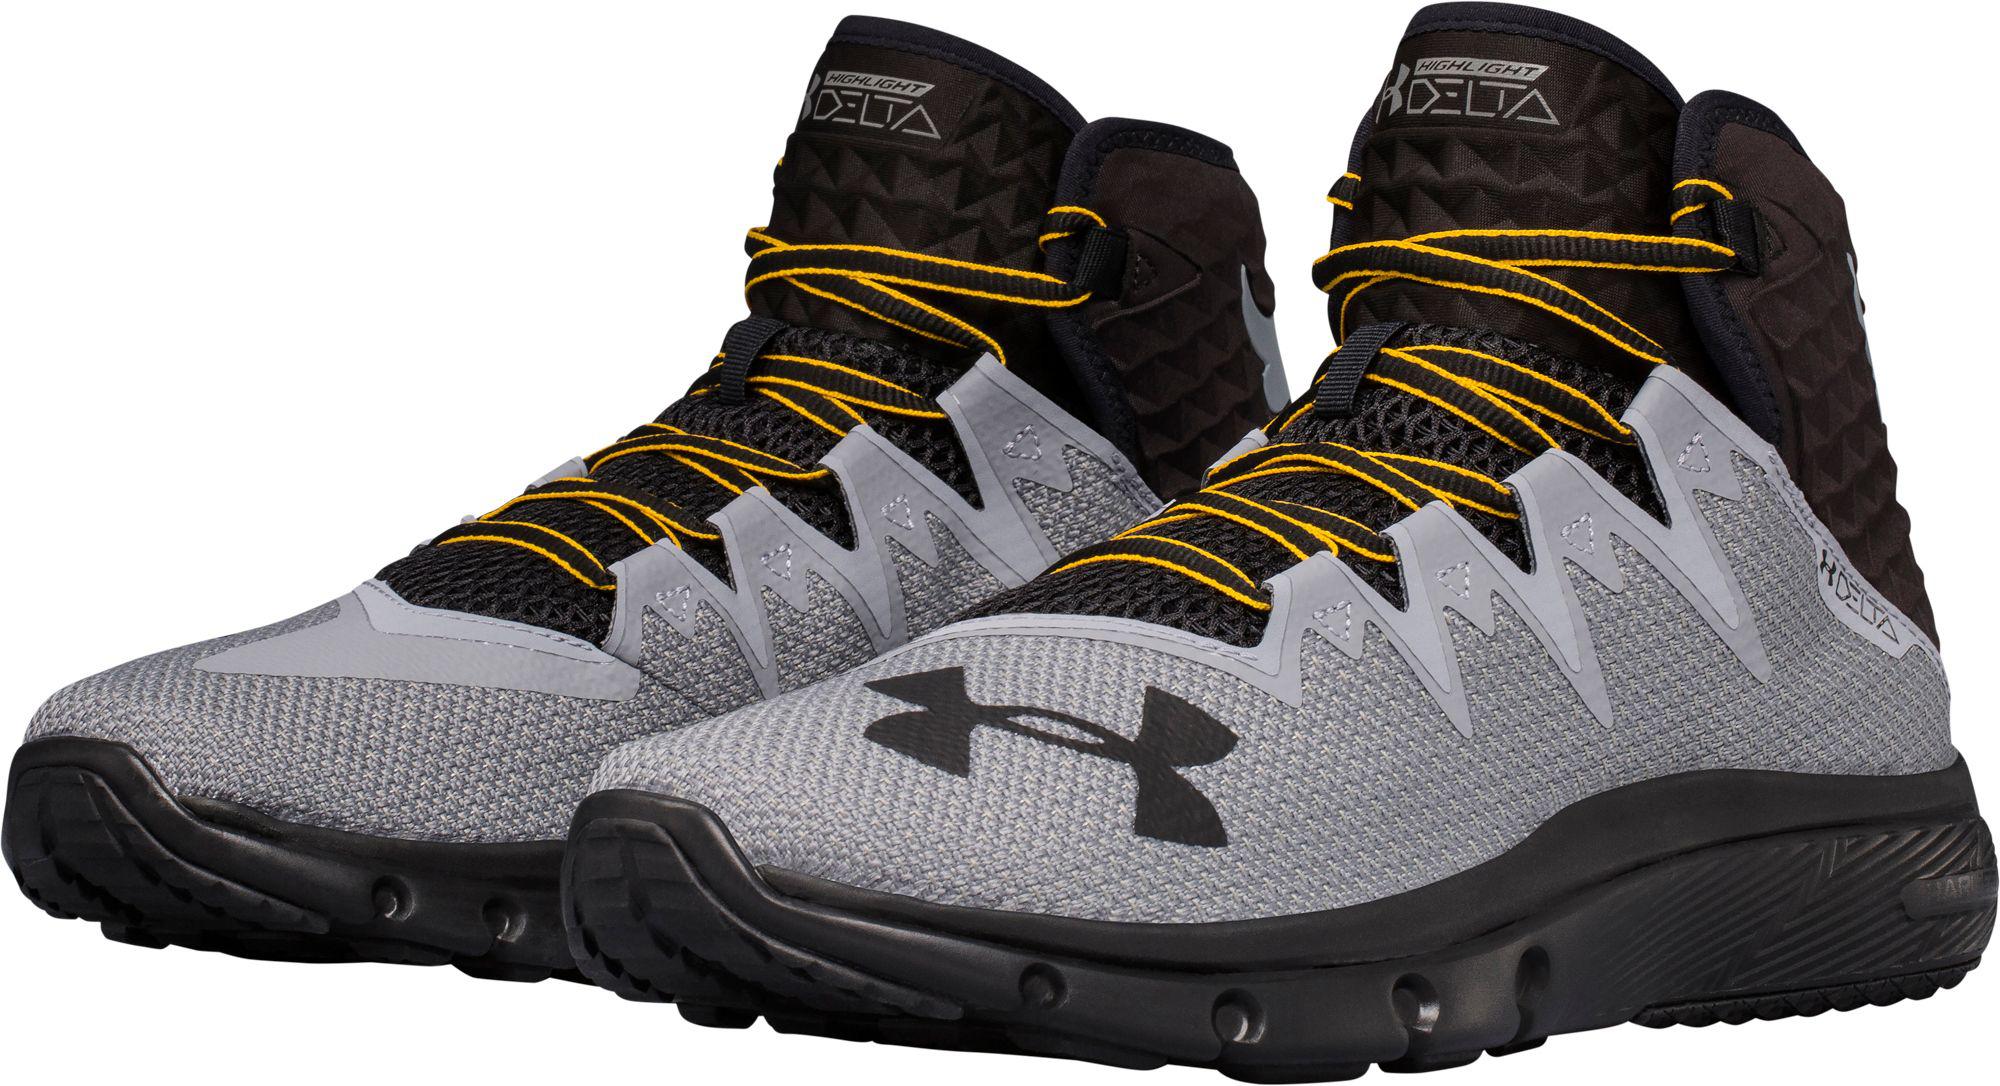 Under Armour Rubber Project Rock Delta Training Shoes in Grey (Gray) for Men - Lyst